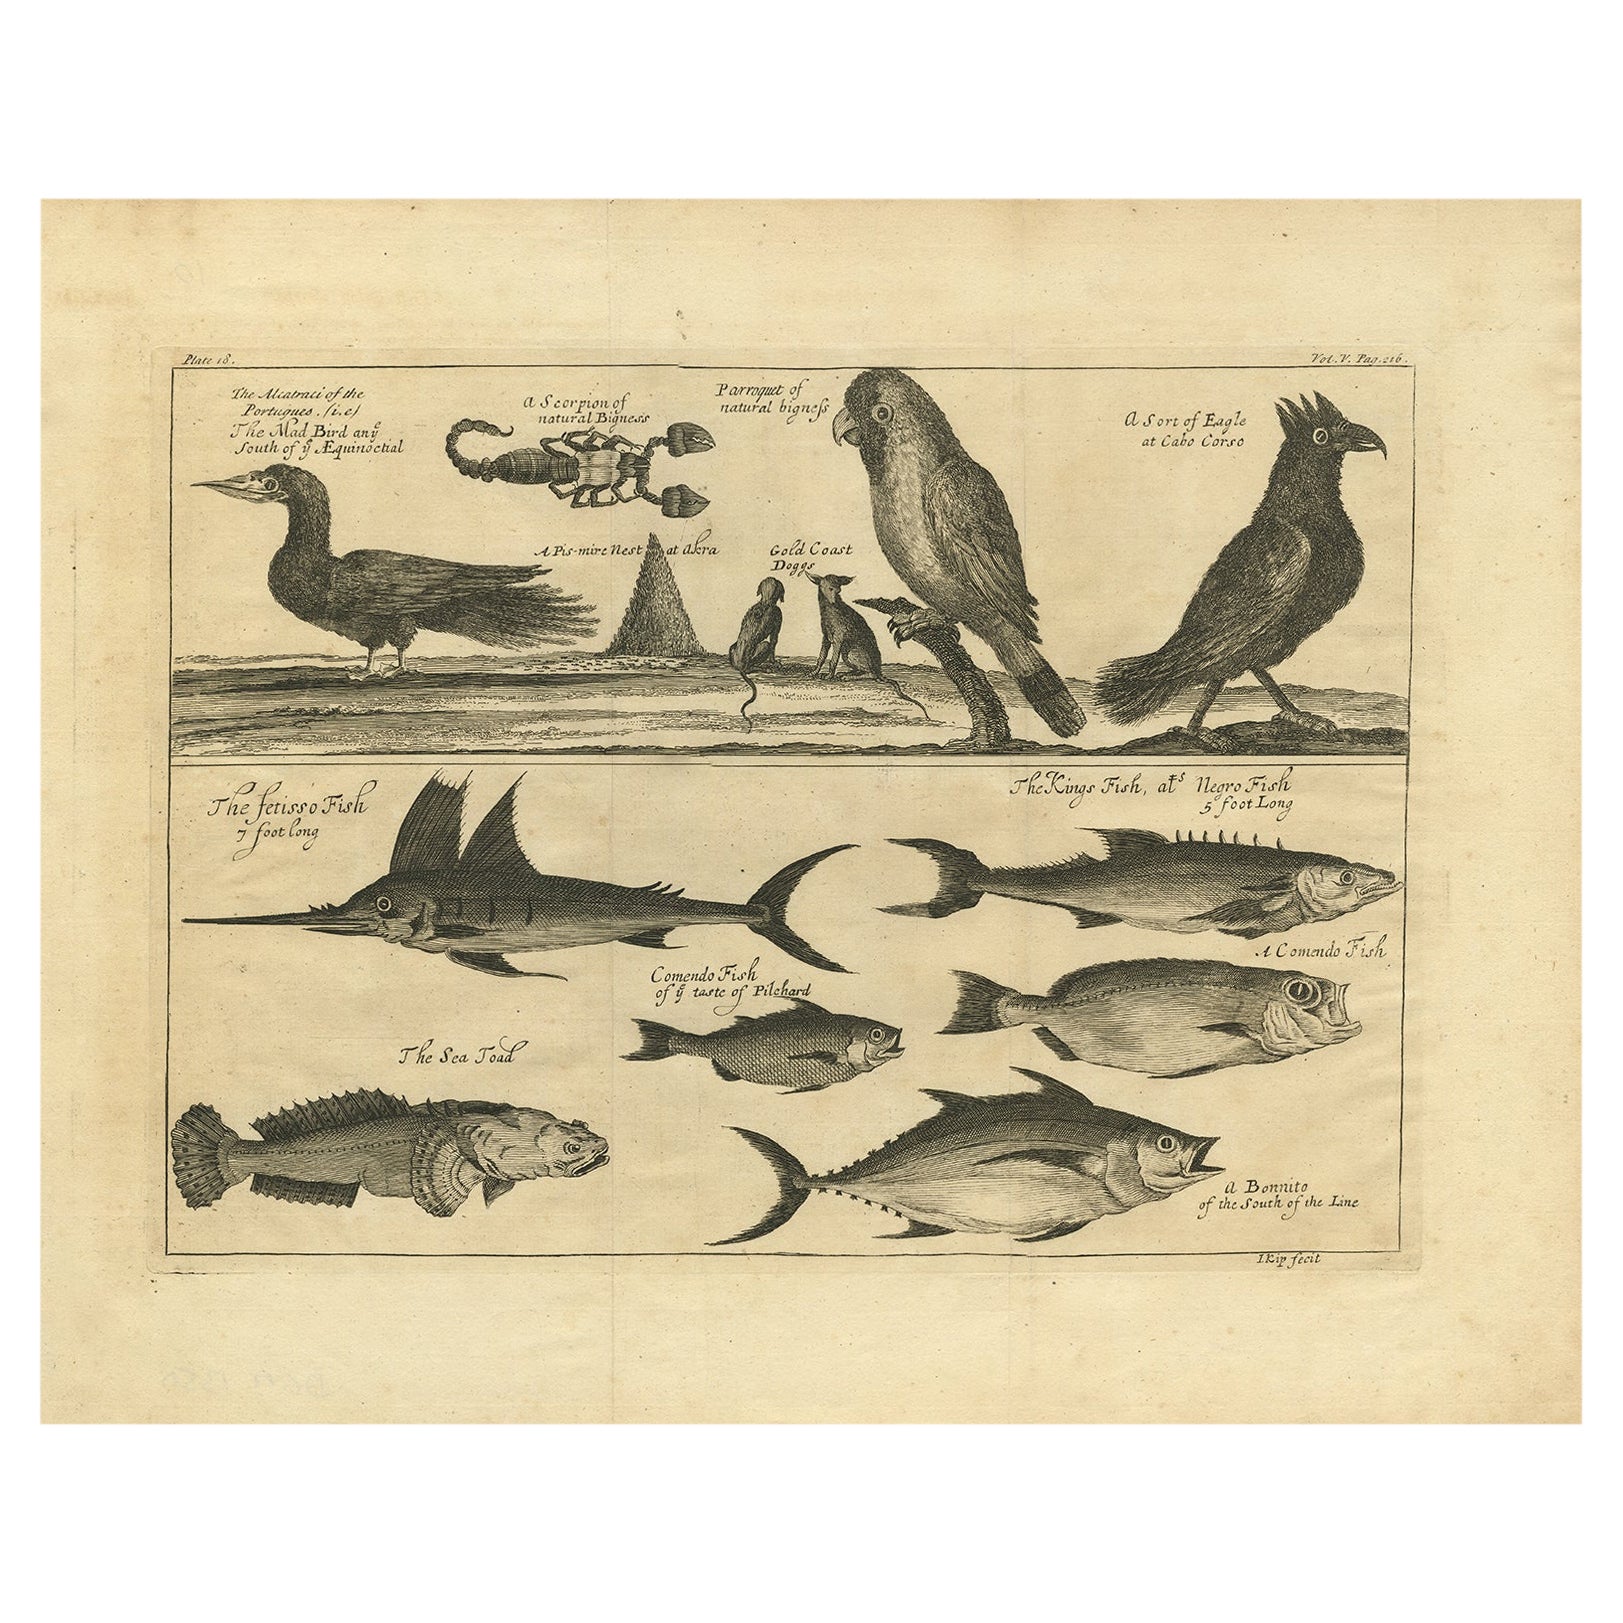 Antique Print of Dogs of the Goldcoast and Guinea Gulf Birds and Fish, 1744